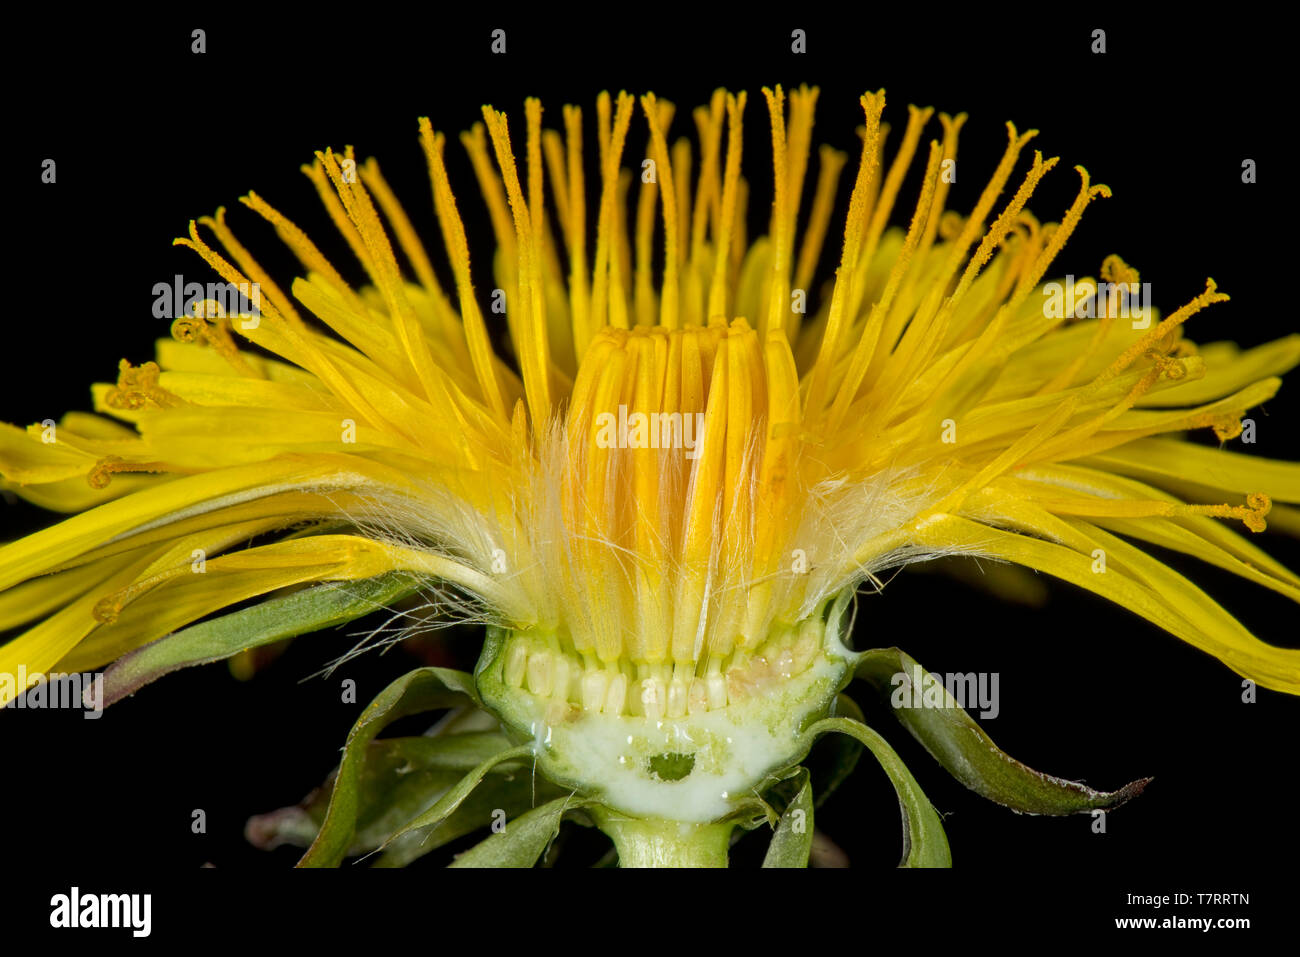 Studio image of a dandelion (Taraxacum officinale) yellow flower section to show composite structure of florets Stock Photo